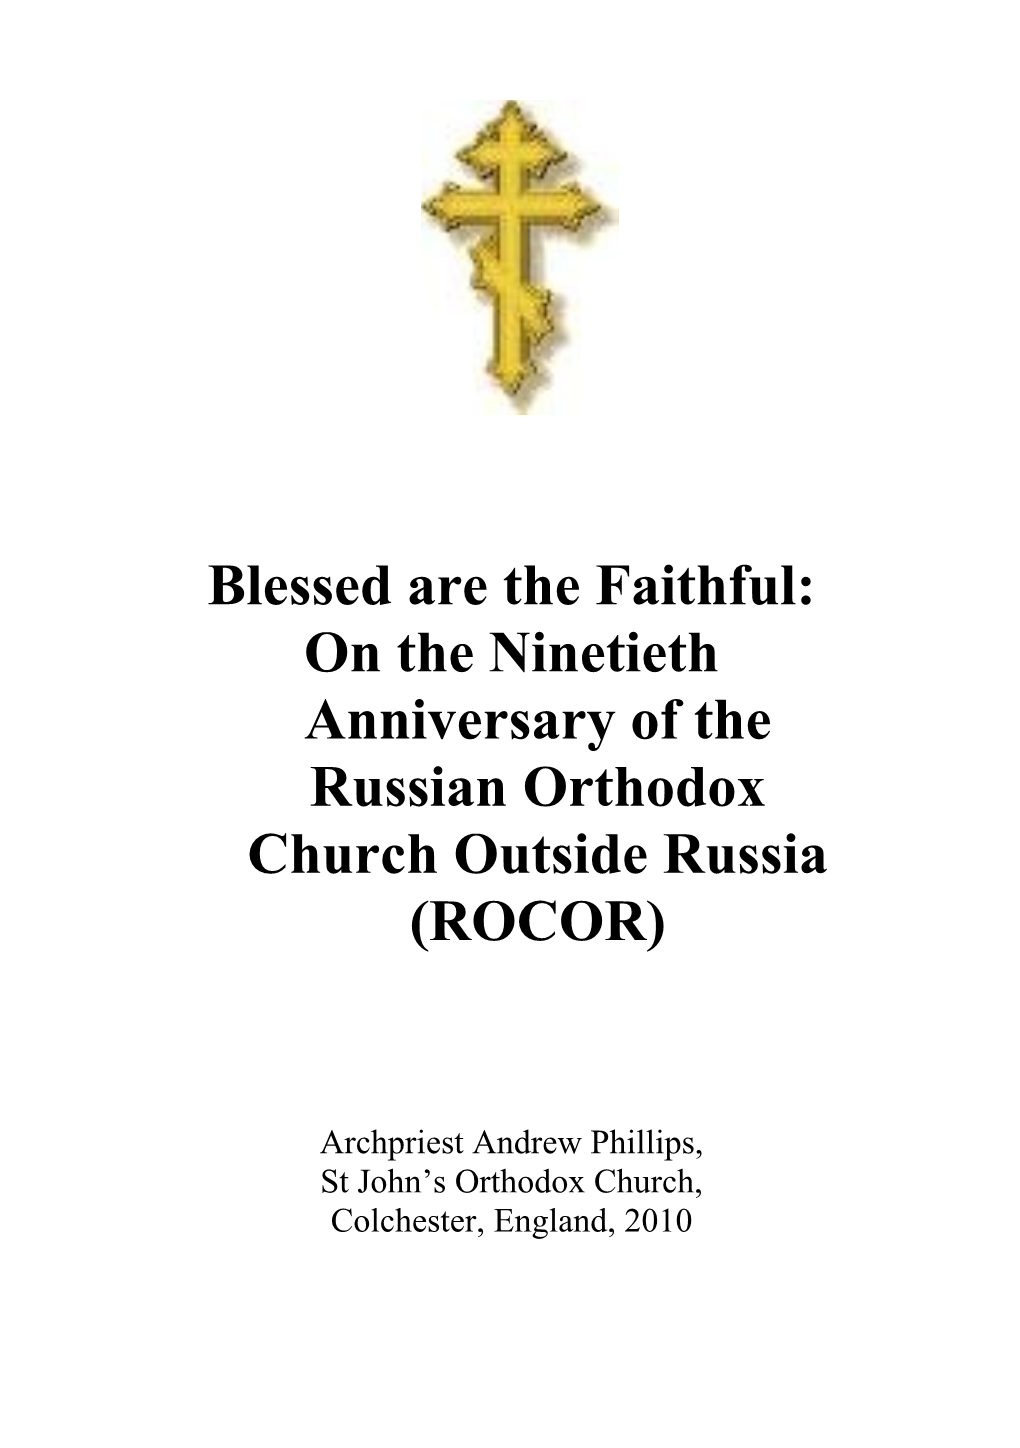 Blessed Are the Faithful: on the Ninetieth Anniversary of the Russian Orthodox Church Outside Russia (ROCOR)